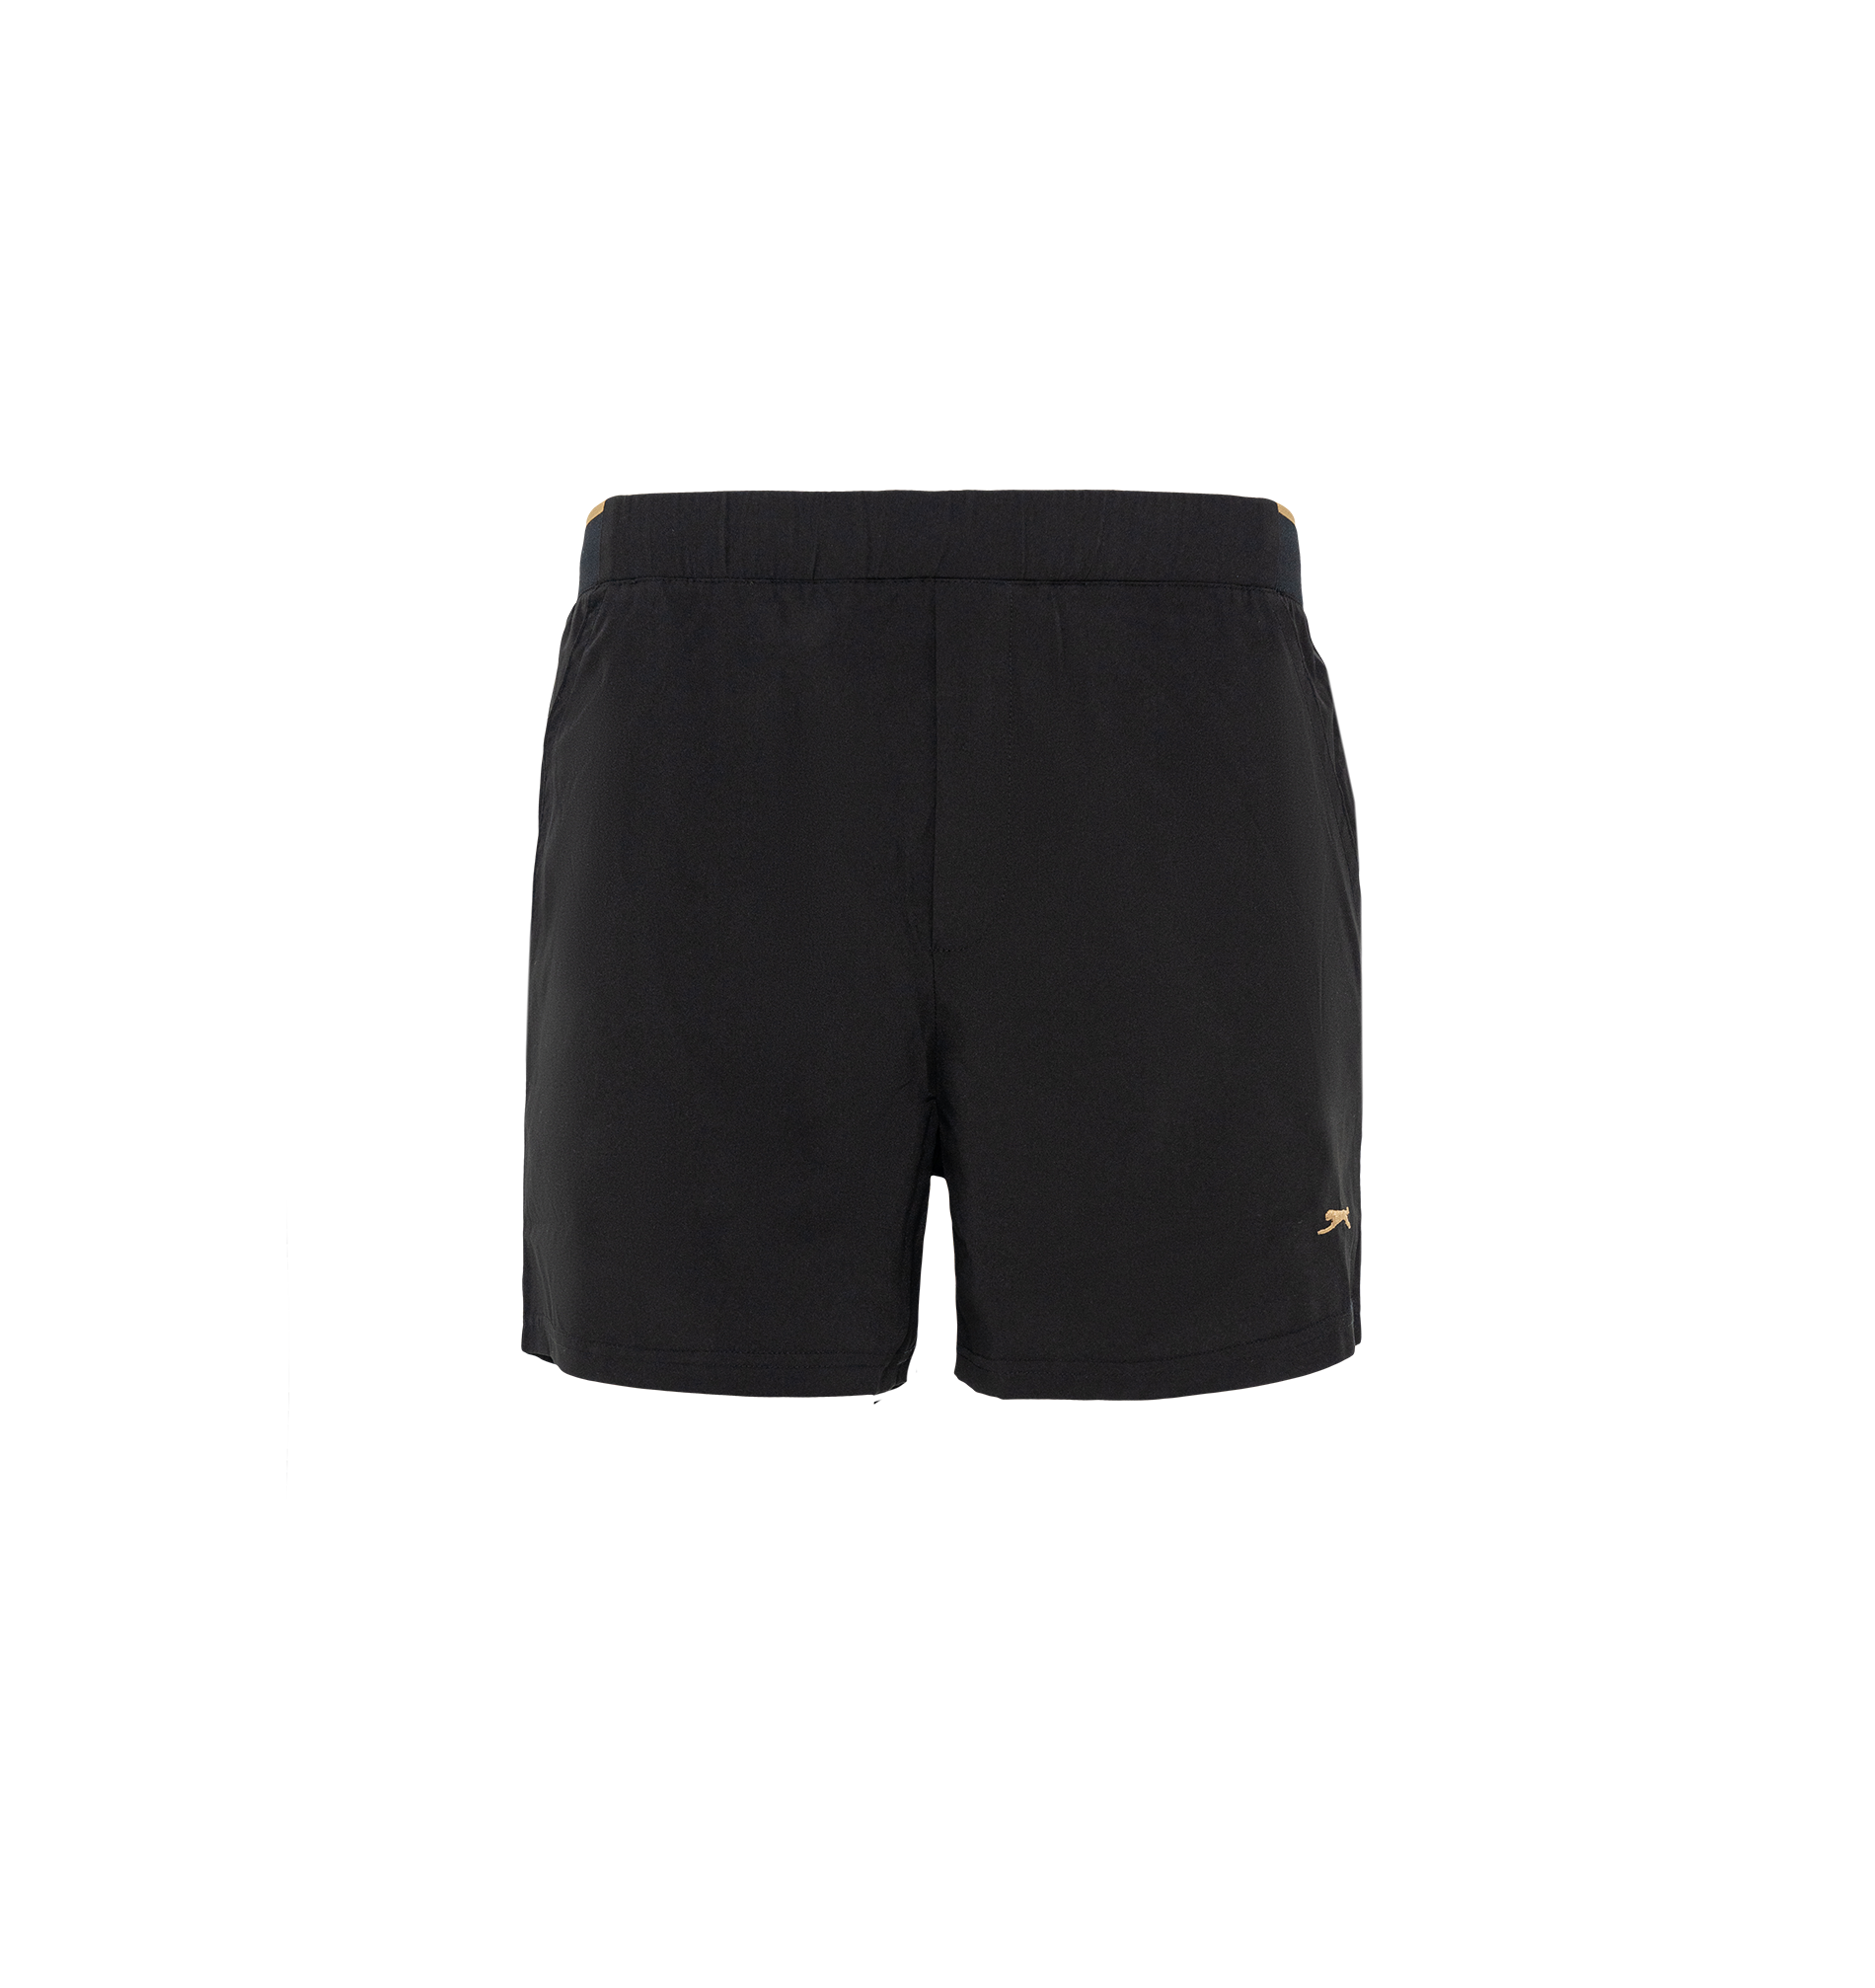 TEO TRACK SHORTS PANTHER BLACK